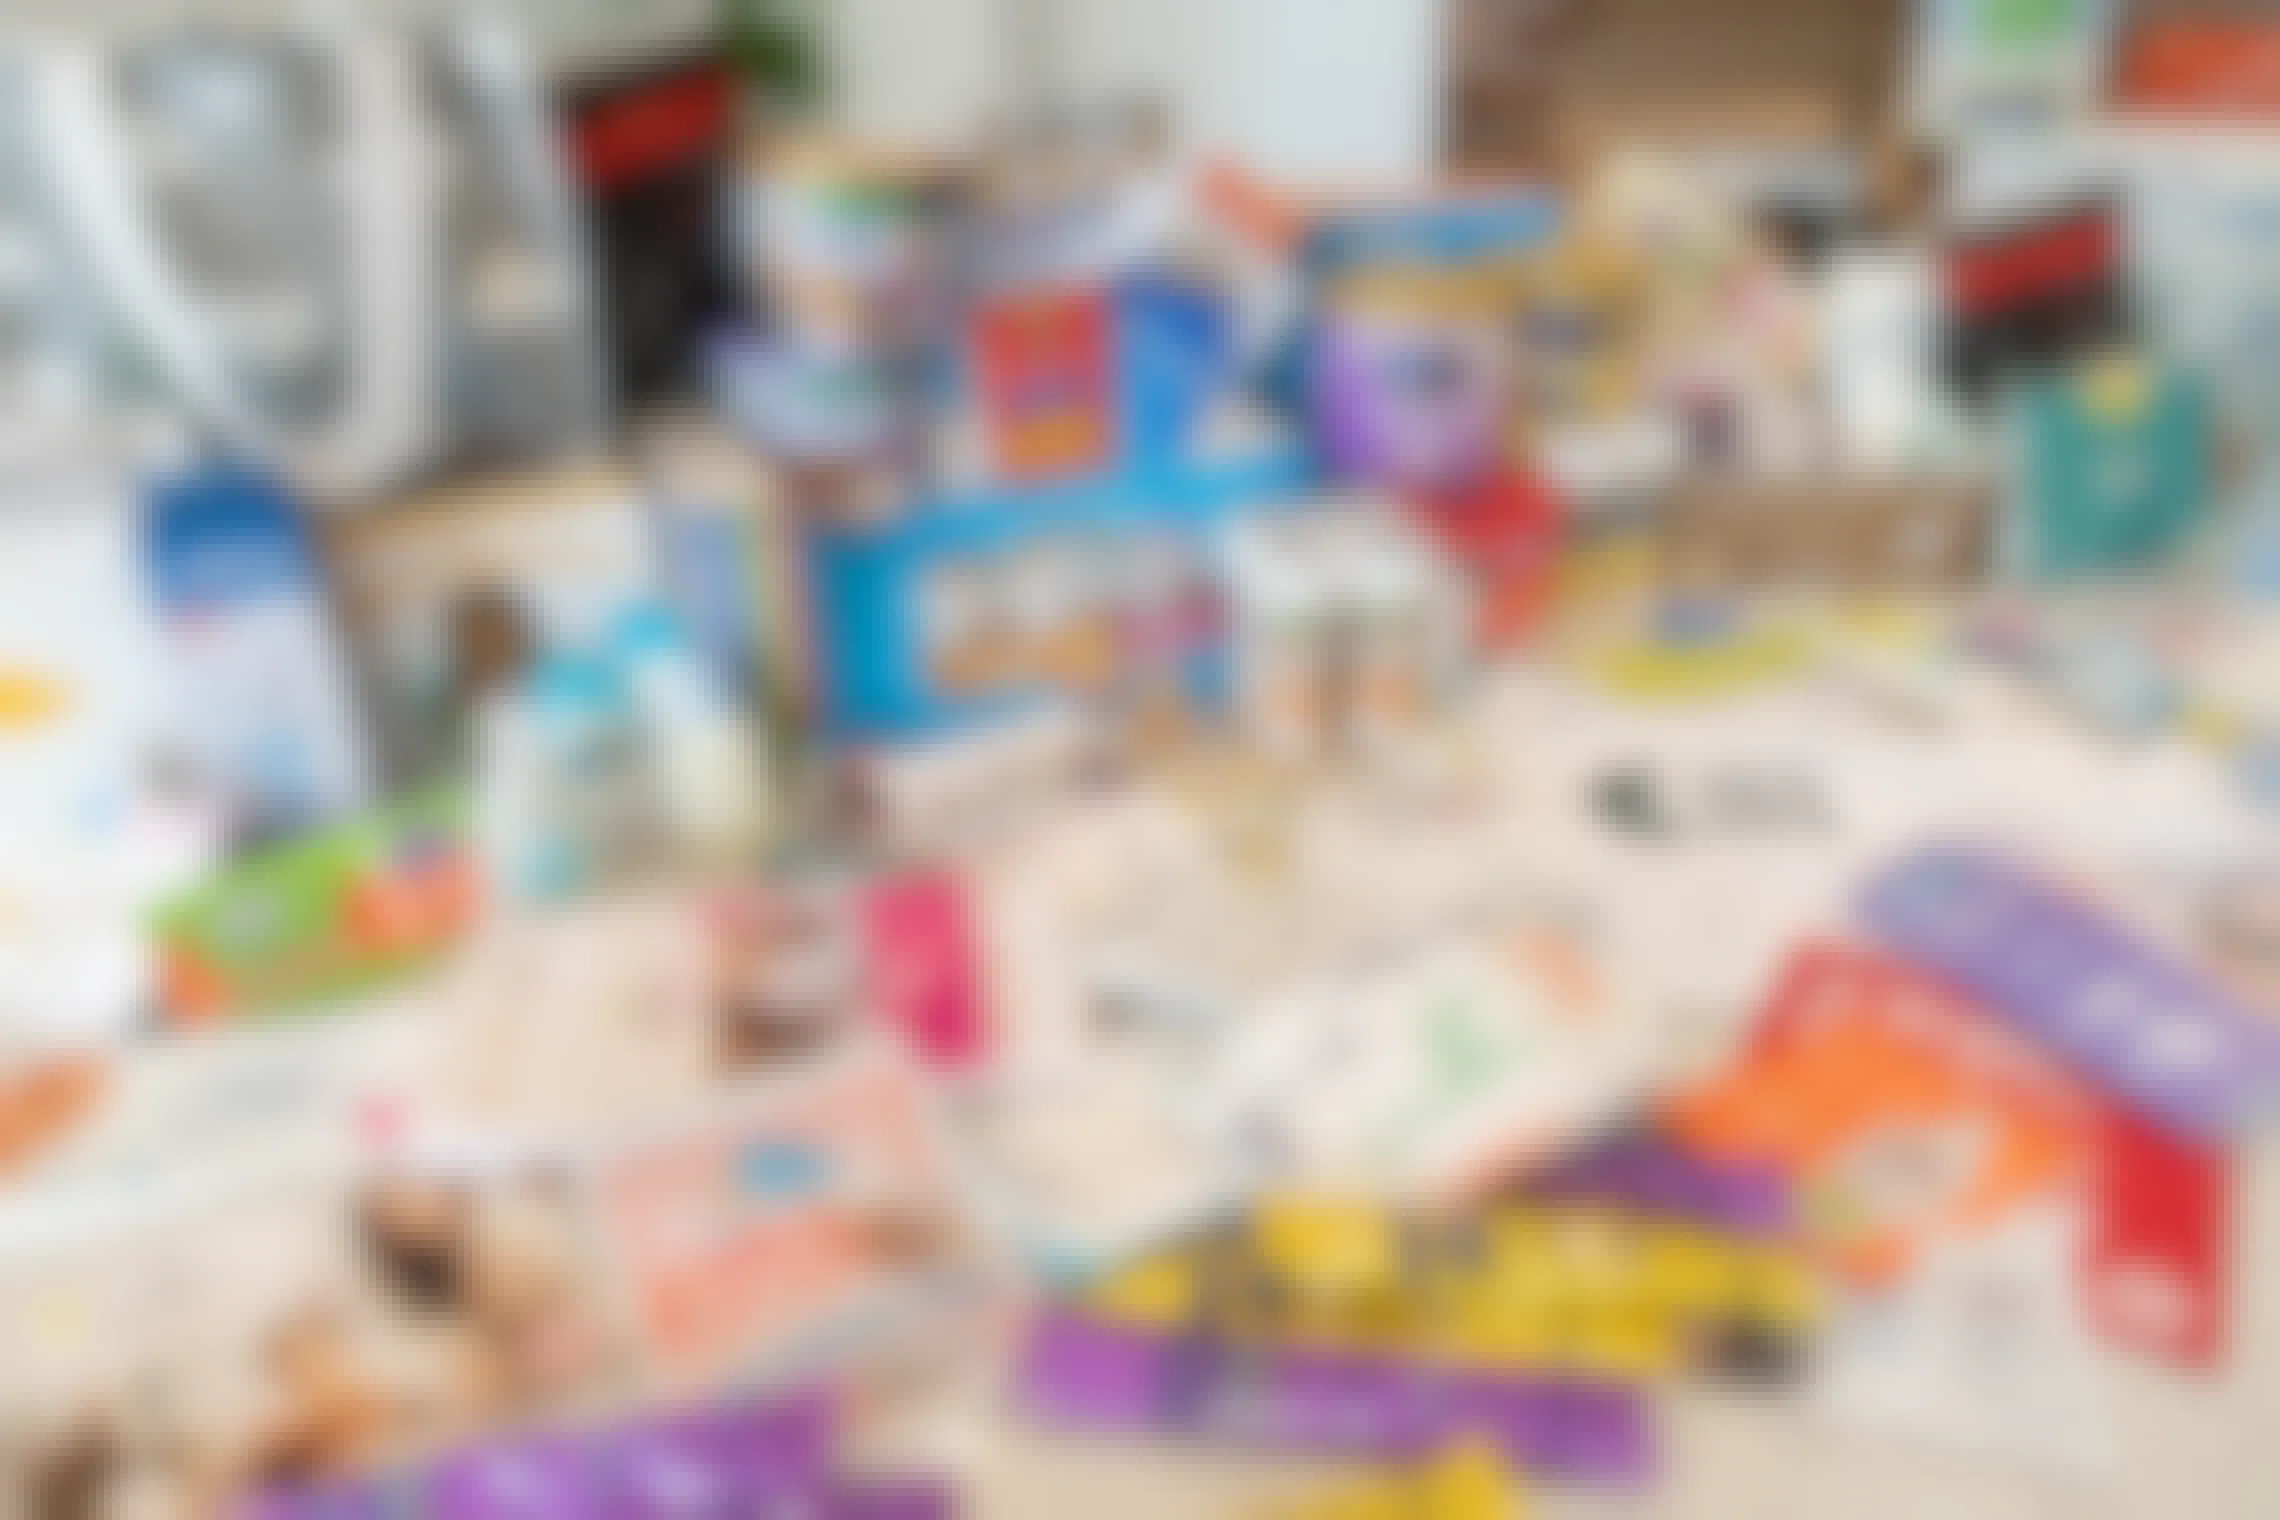 A large amount of baby products laid out on a counter top.